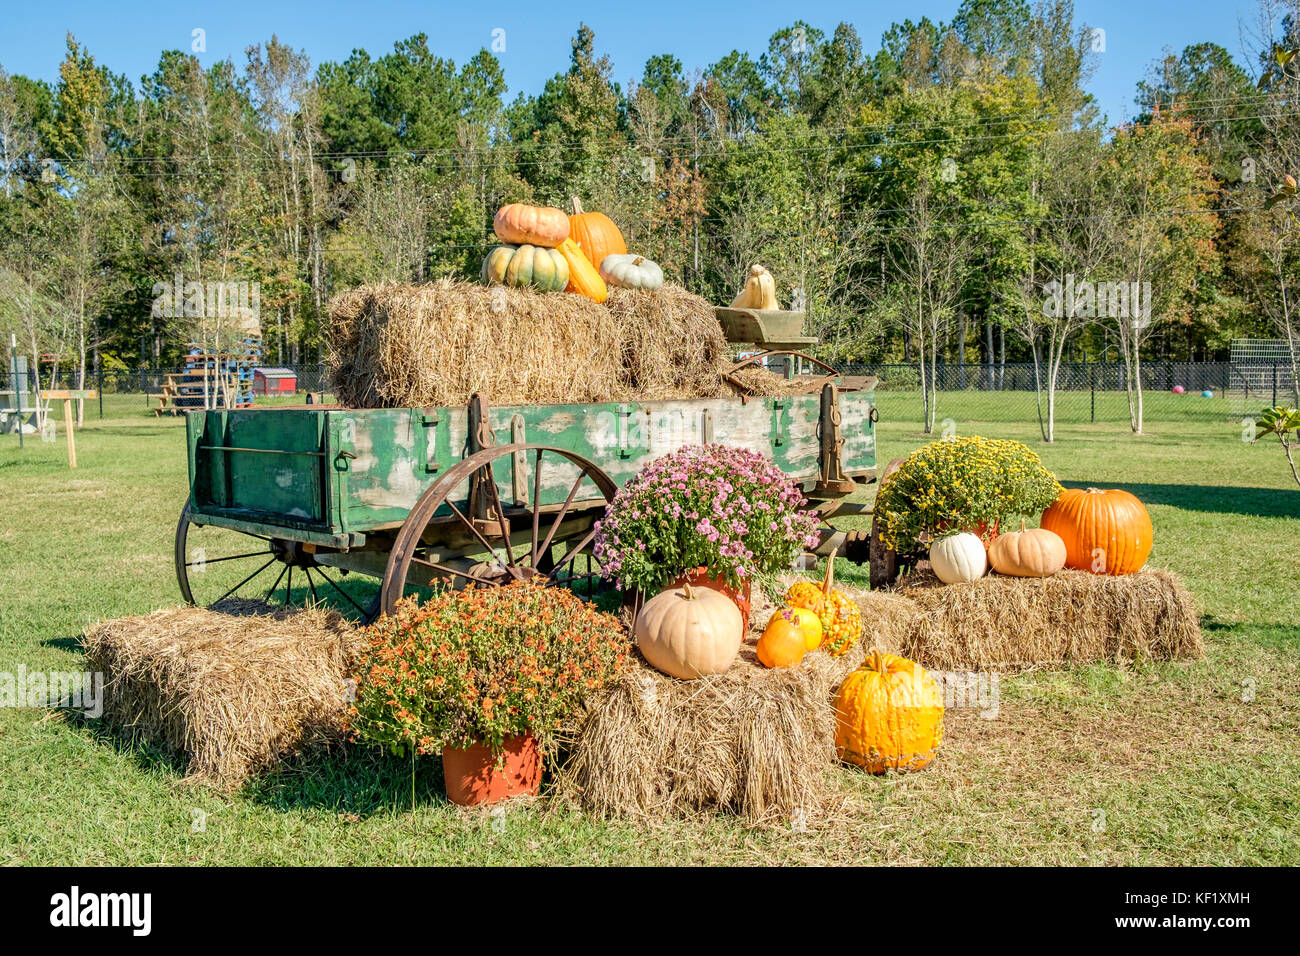 Old farm wagon decorated with pumpkins, gourds, hay bales and flowers for the American Halloween holiday, in rural Alabama USA. Stock Photo